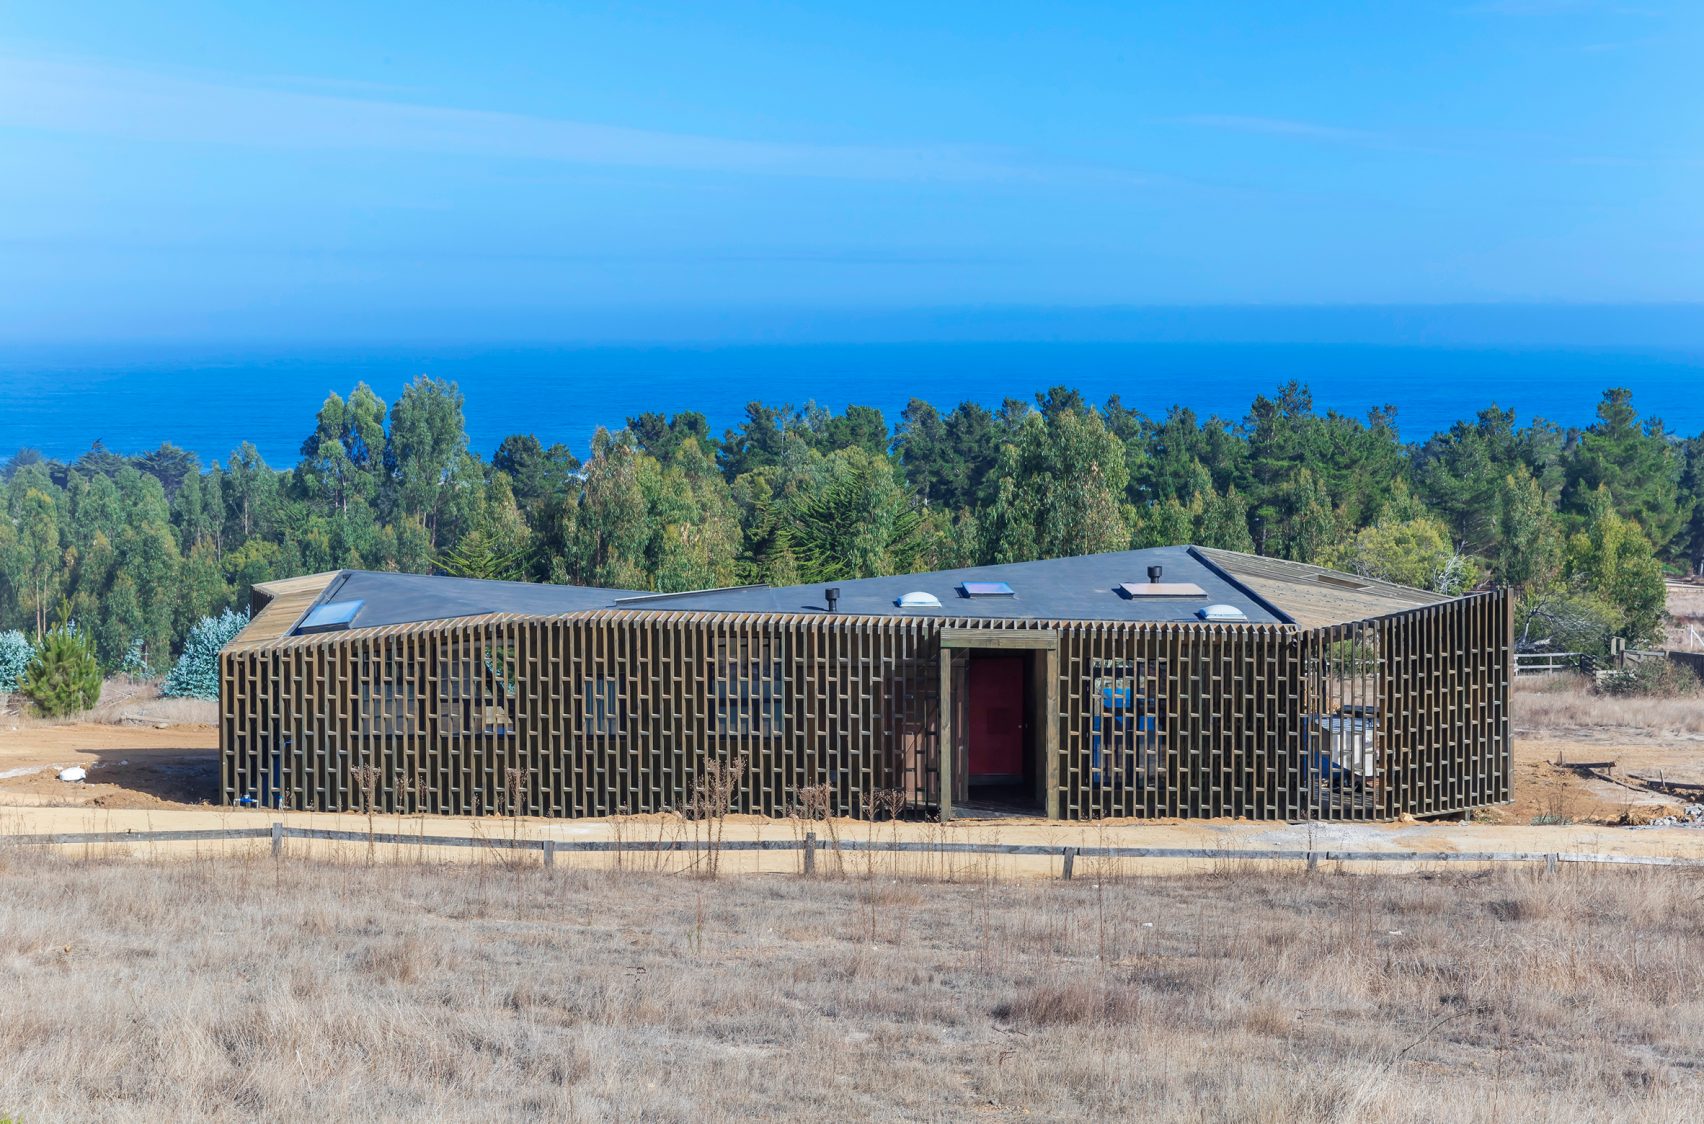 This beach house wrapped in a pavilion of slatted pine wood is located on a privileged western slope of the coastal mountain range in Punta de Lobos, Chile and presents amazing views of the South Pacific. Designed by LAND Arquitectos, the idea of the house is to optimize the views of the sea, maximize northern sunlight and offer protection from the south wind.